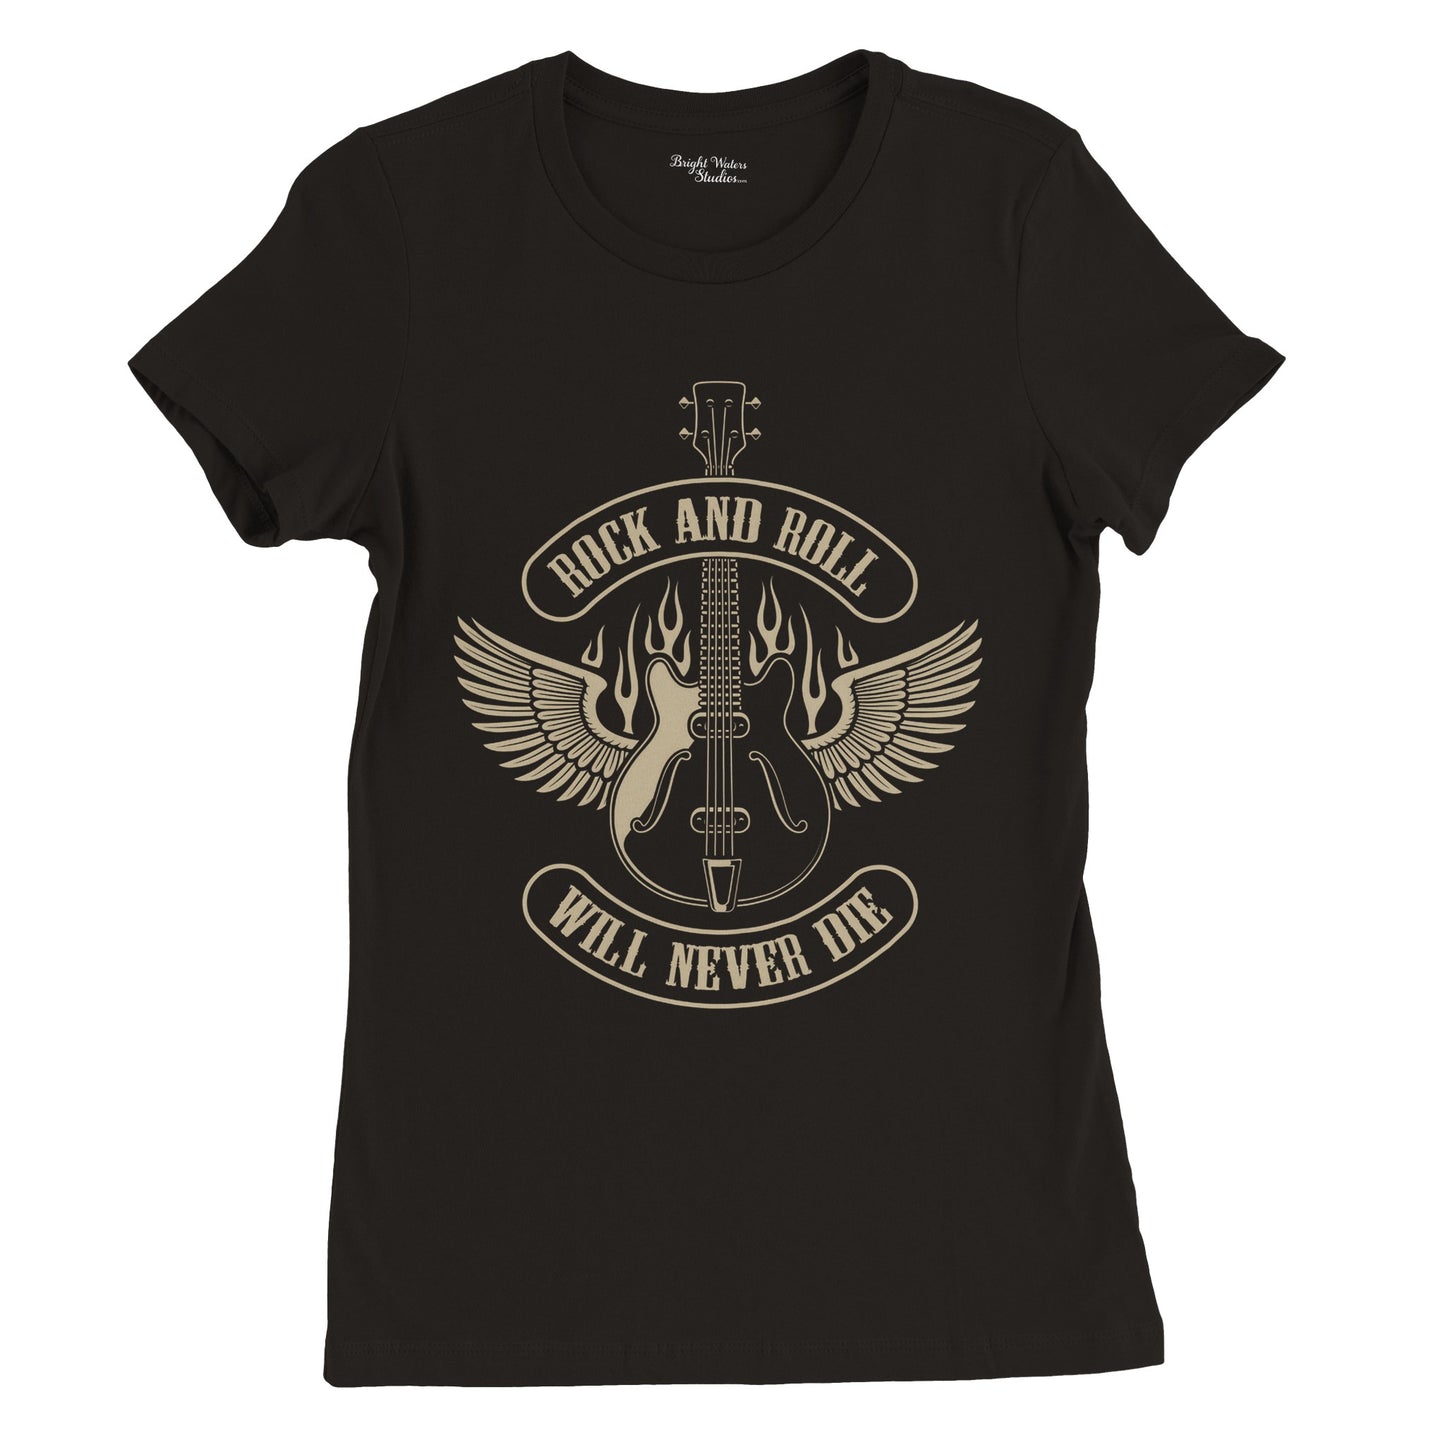 Rock and Roll Will Never Die Womens T-shirt